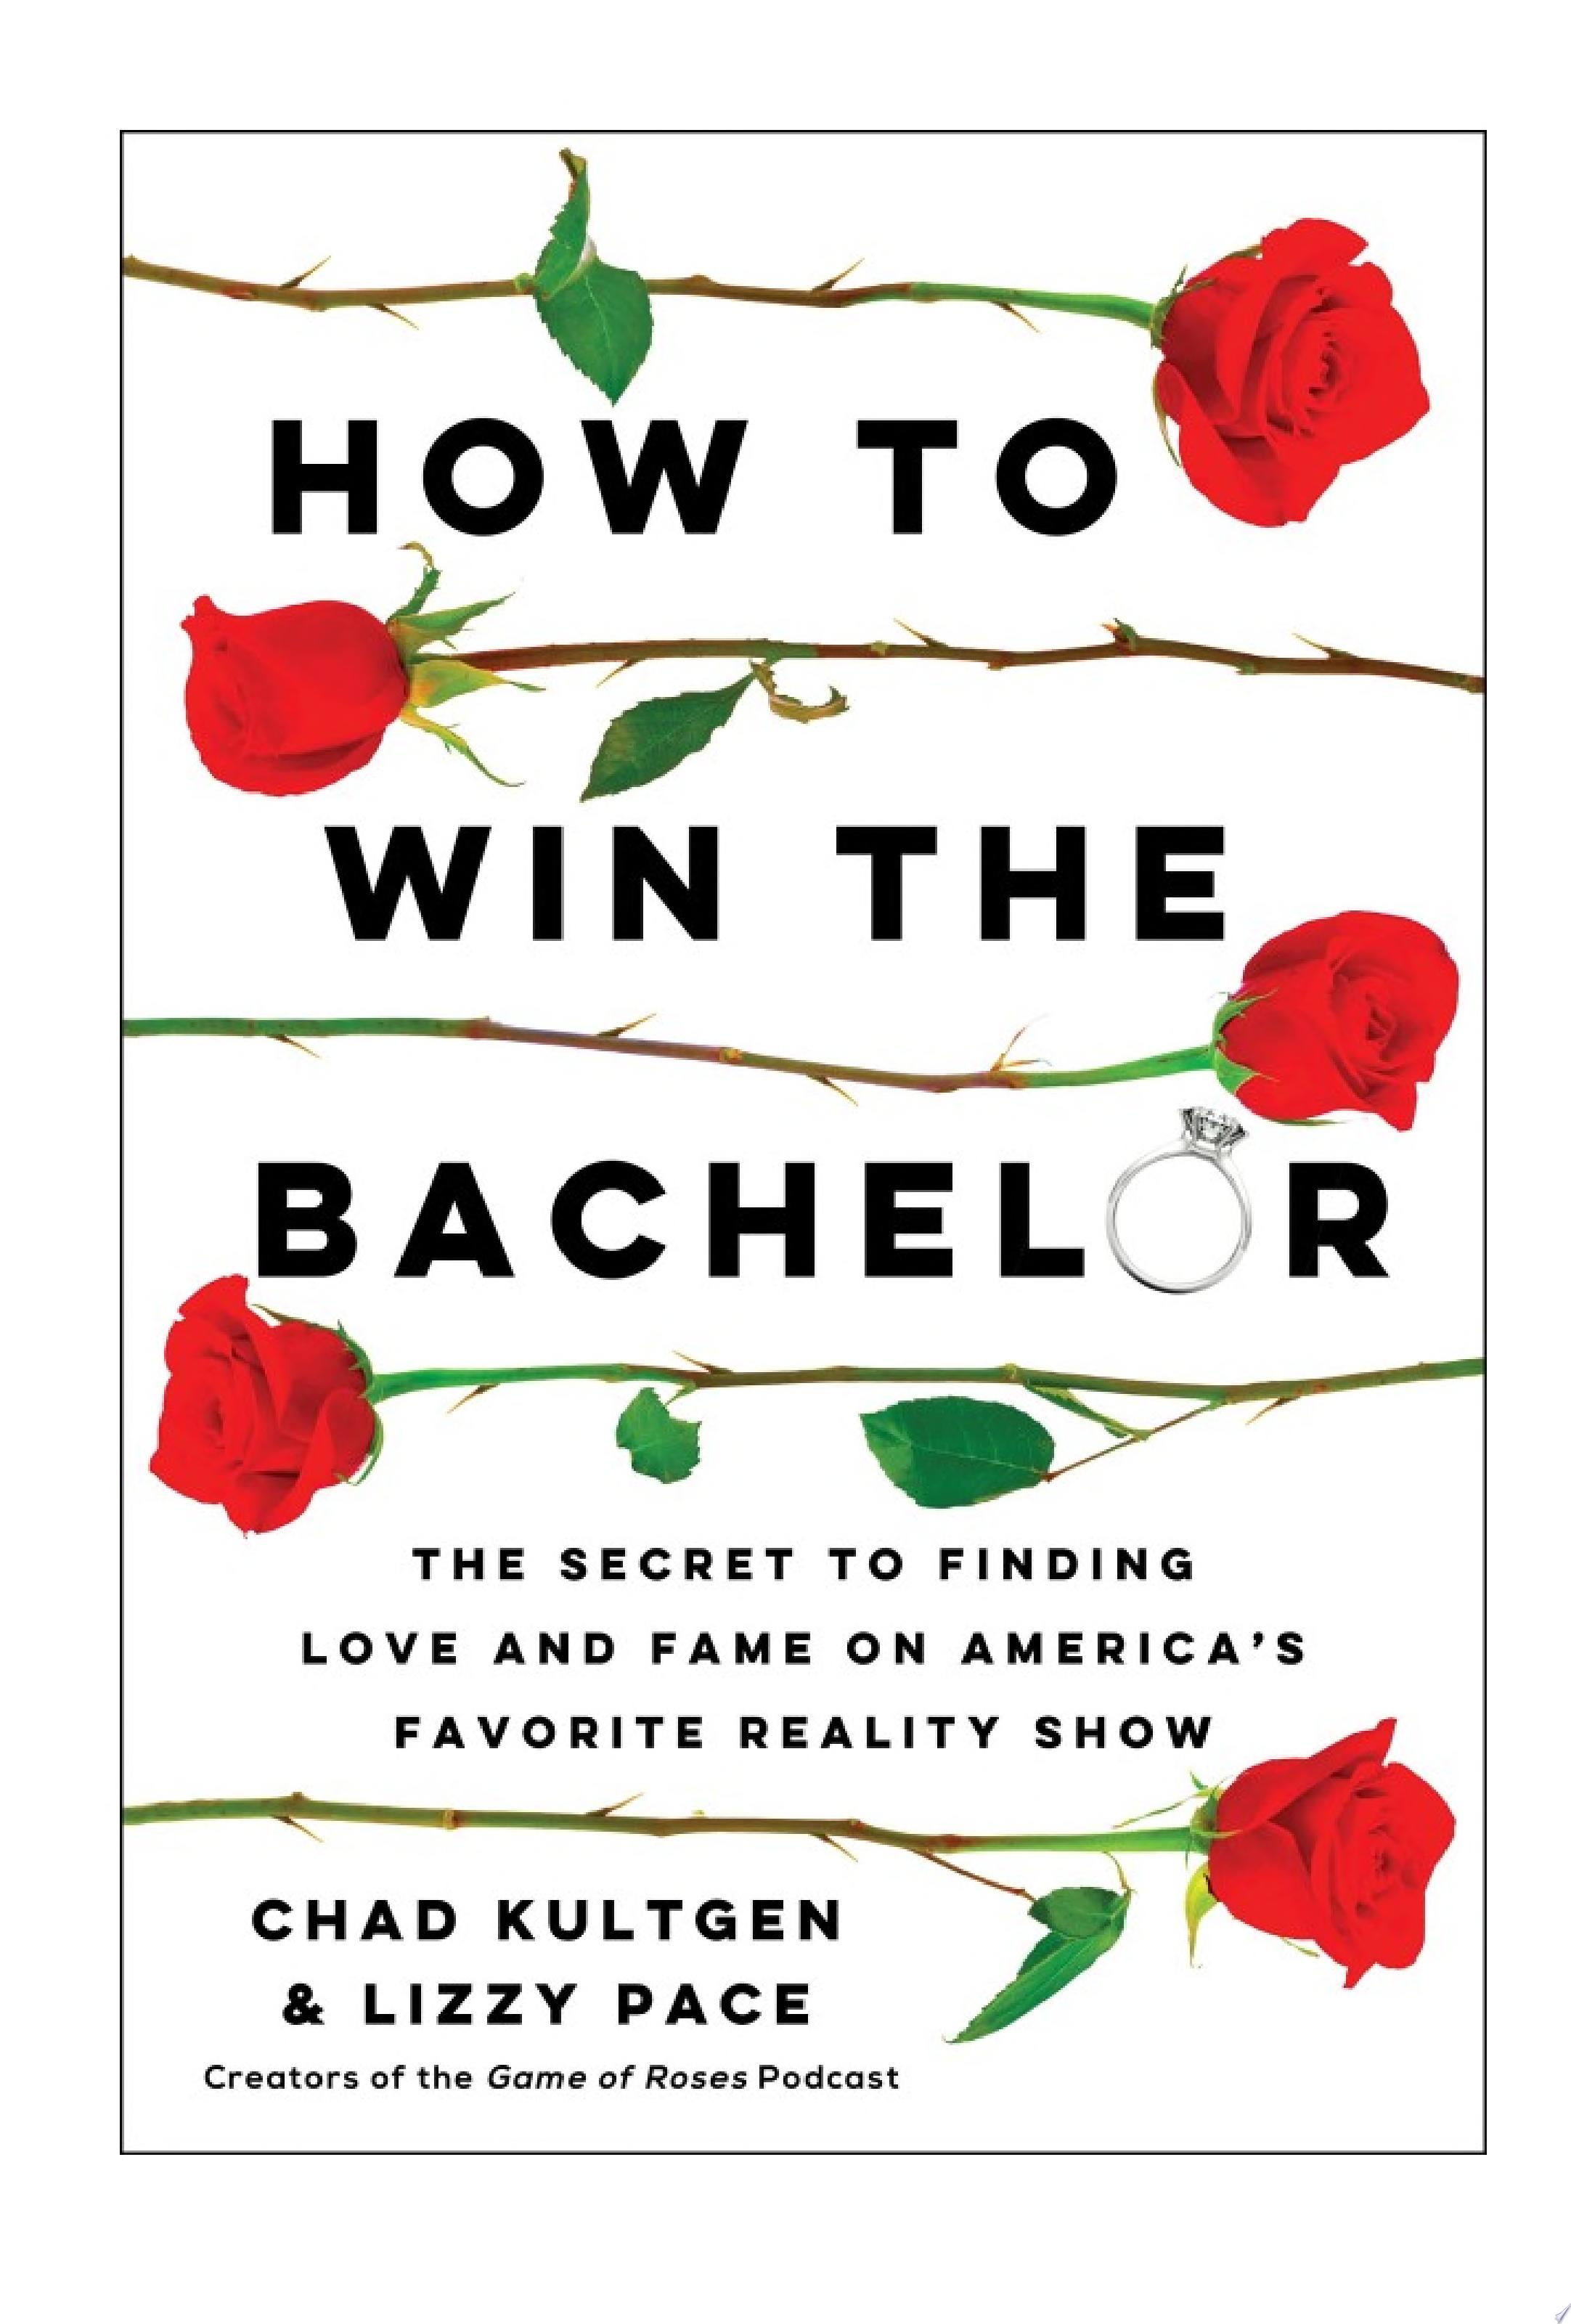 Image for "How to Win The Bachelor"